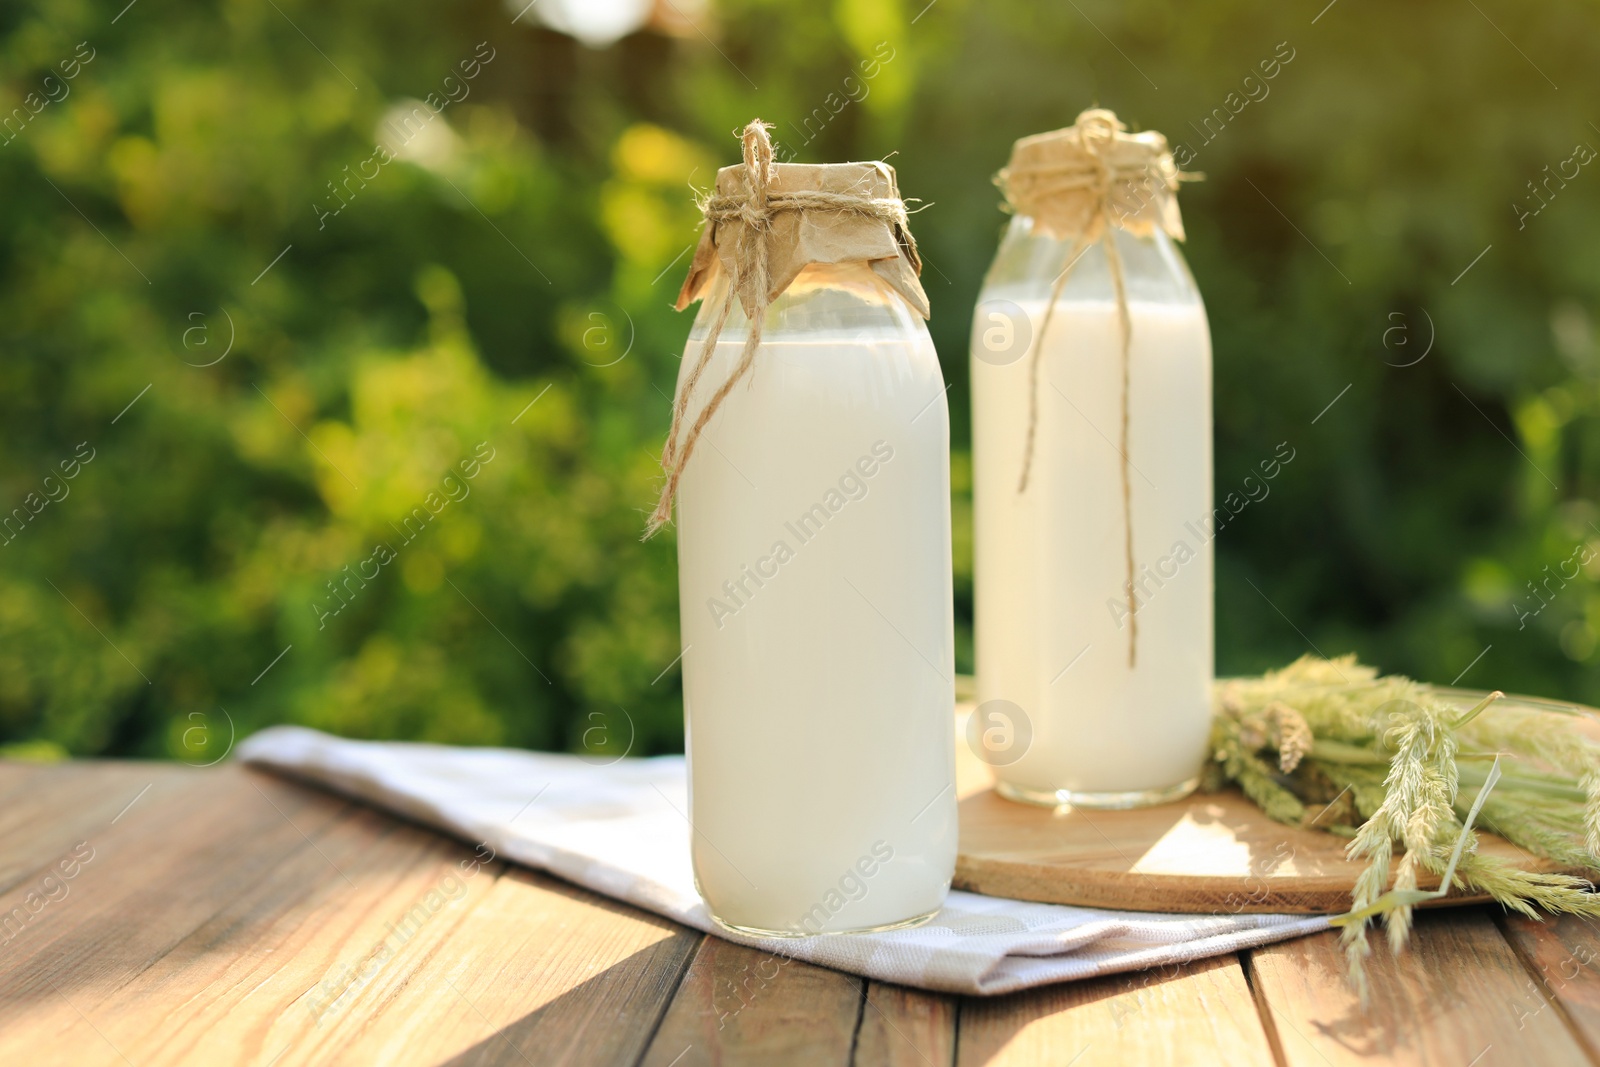 Photo of Bottles of tasty fresh milk on wooden table outdoors, space for text